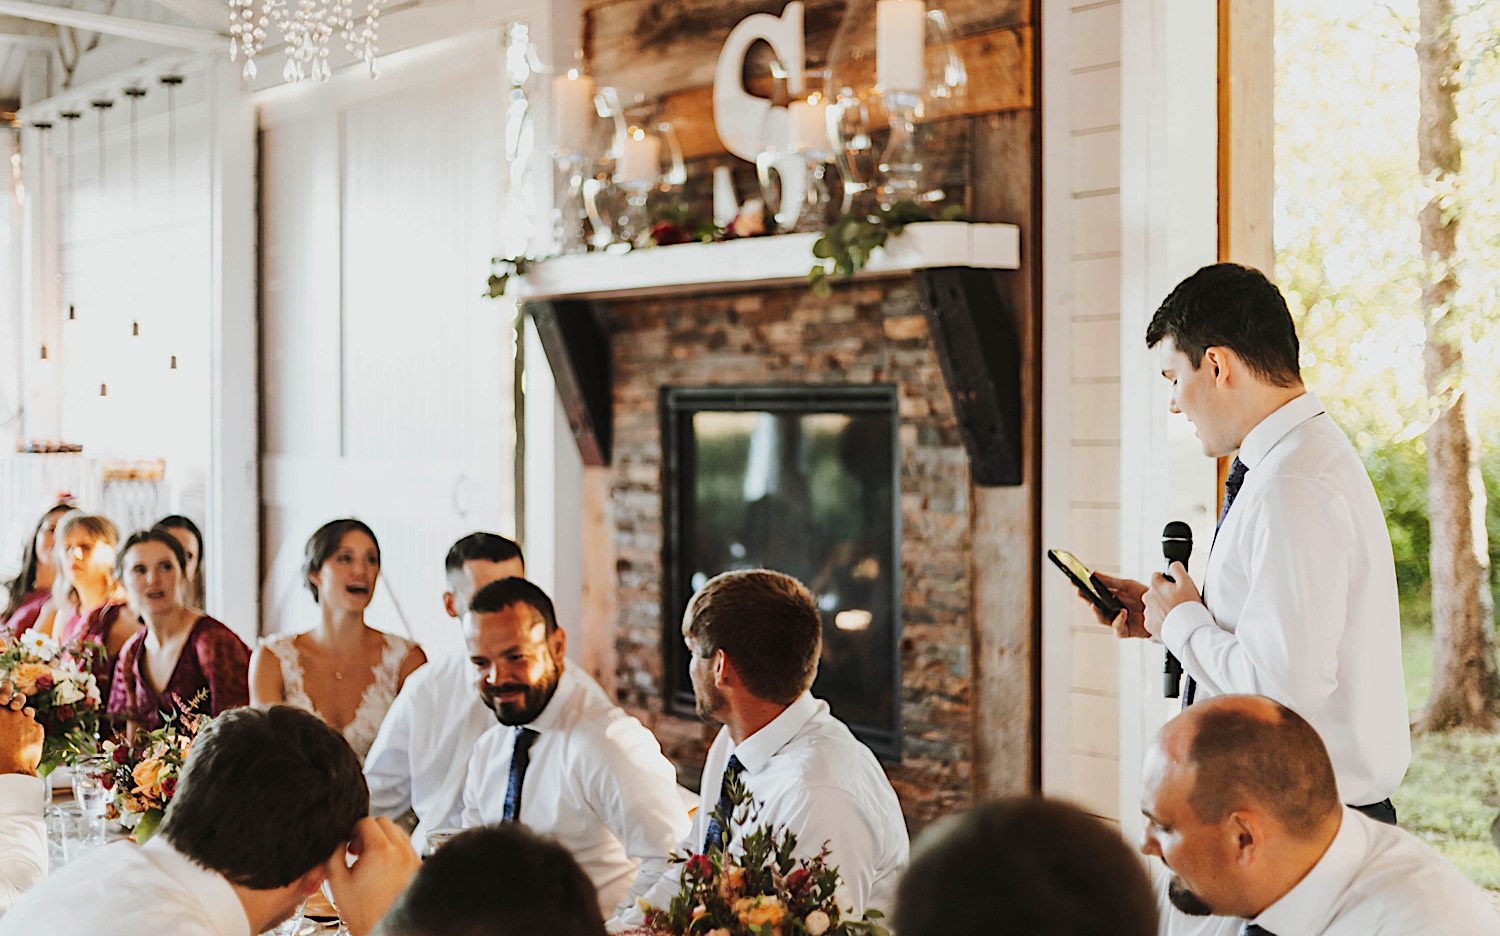 A groomsman gives a speech during a wedding reception at Legacy Hill Farm's indoor reception space